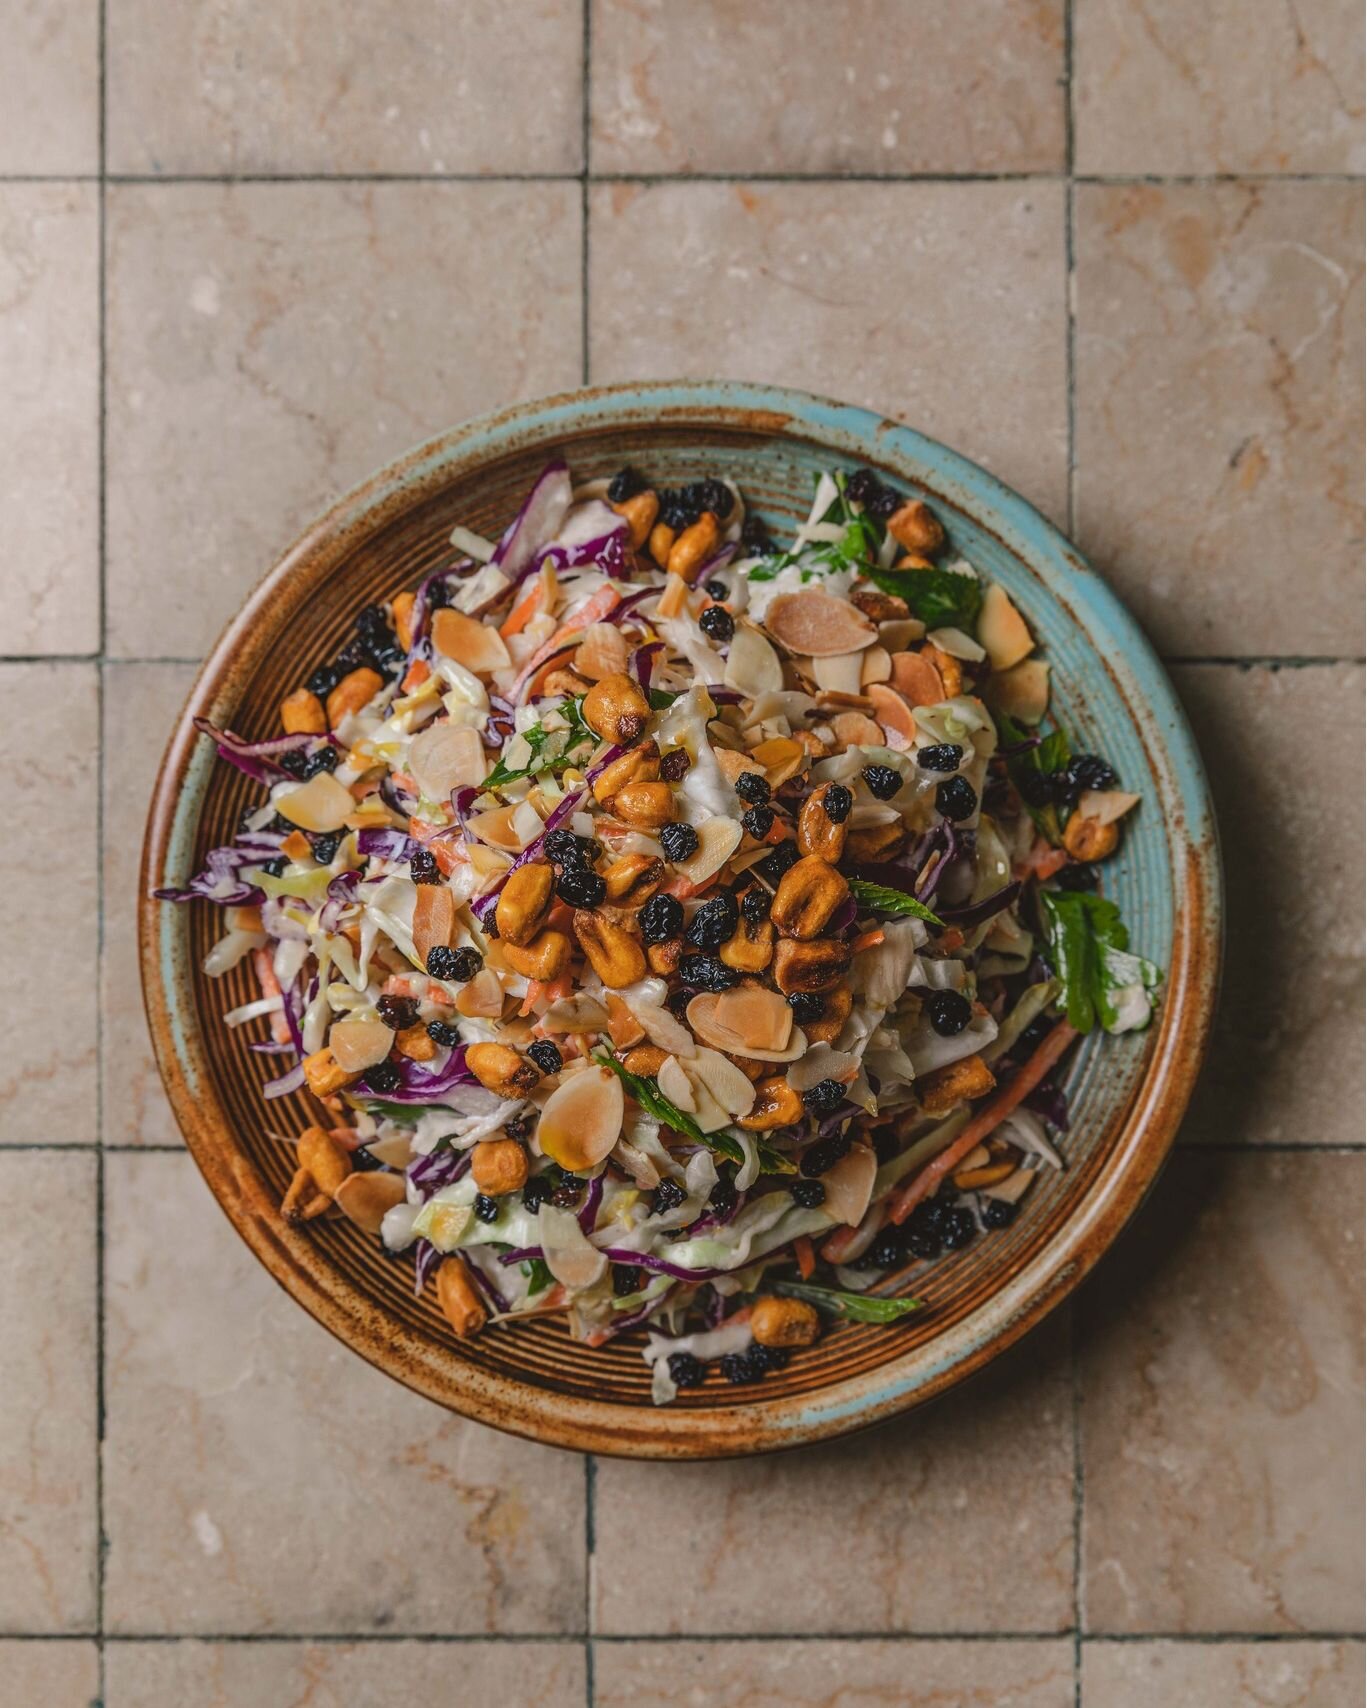 Our Greek Slaw is made with cabbage, carrots, kasseri, mint, BBQ corn, and buttermilk aioli, making the perfect side dish to accompany your meal.

Explore our menu and reserve your table today.

#mimby1821 #greekrestaurant #sydneyrestaurant